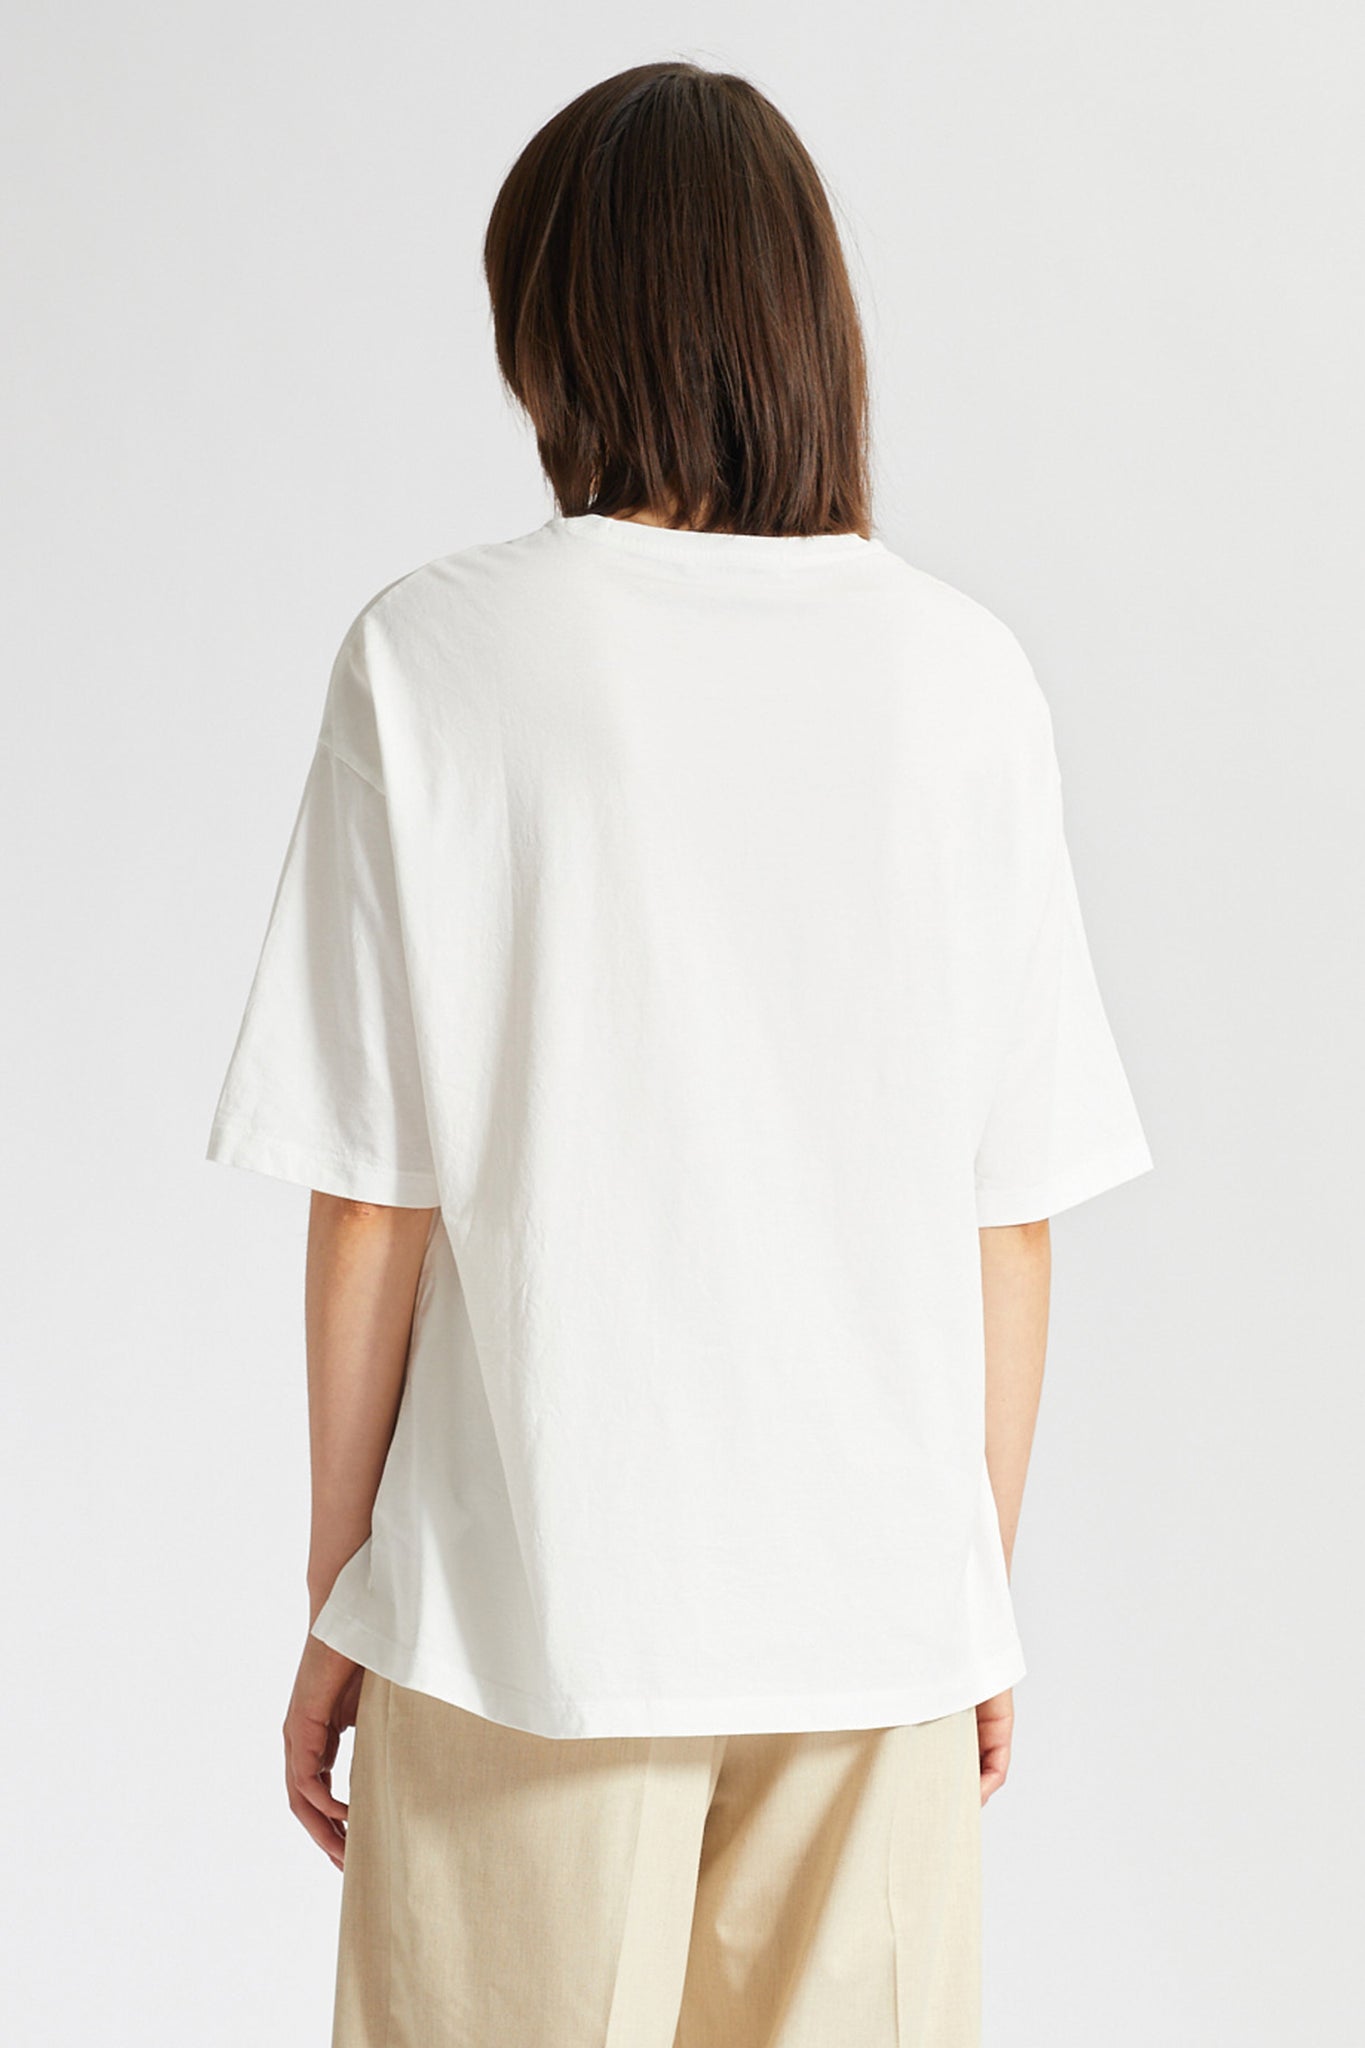 Oda T-Shirt in off-white by Wood Wood